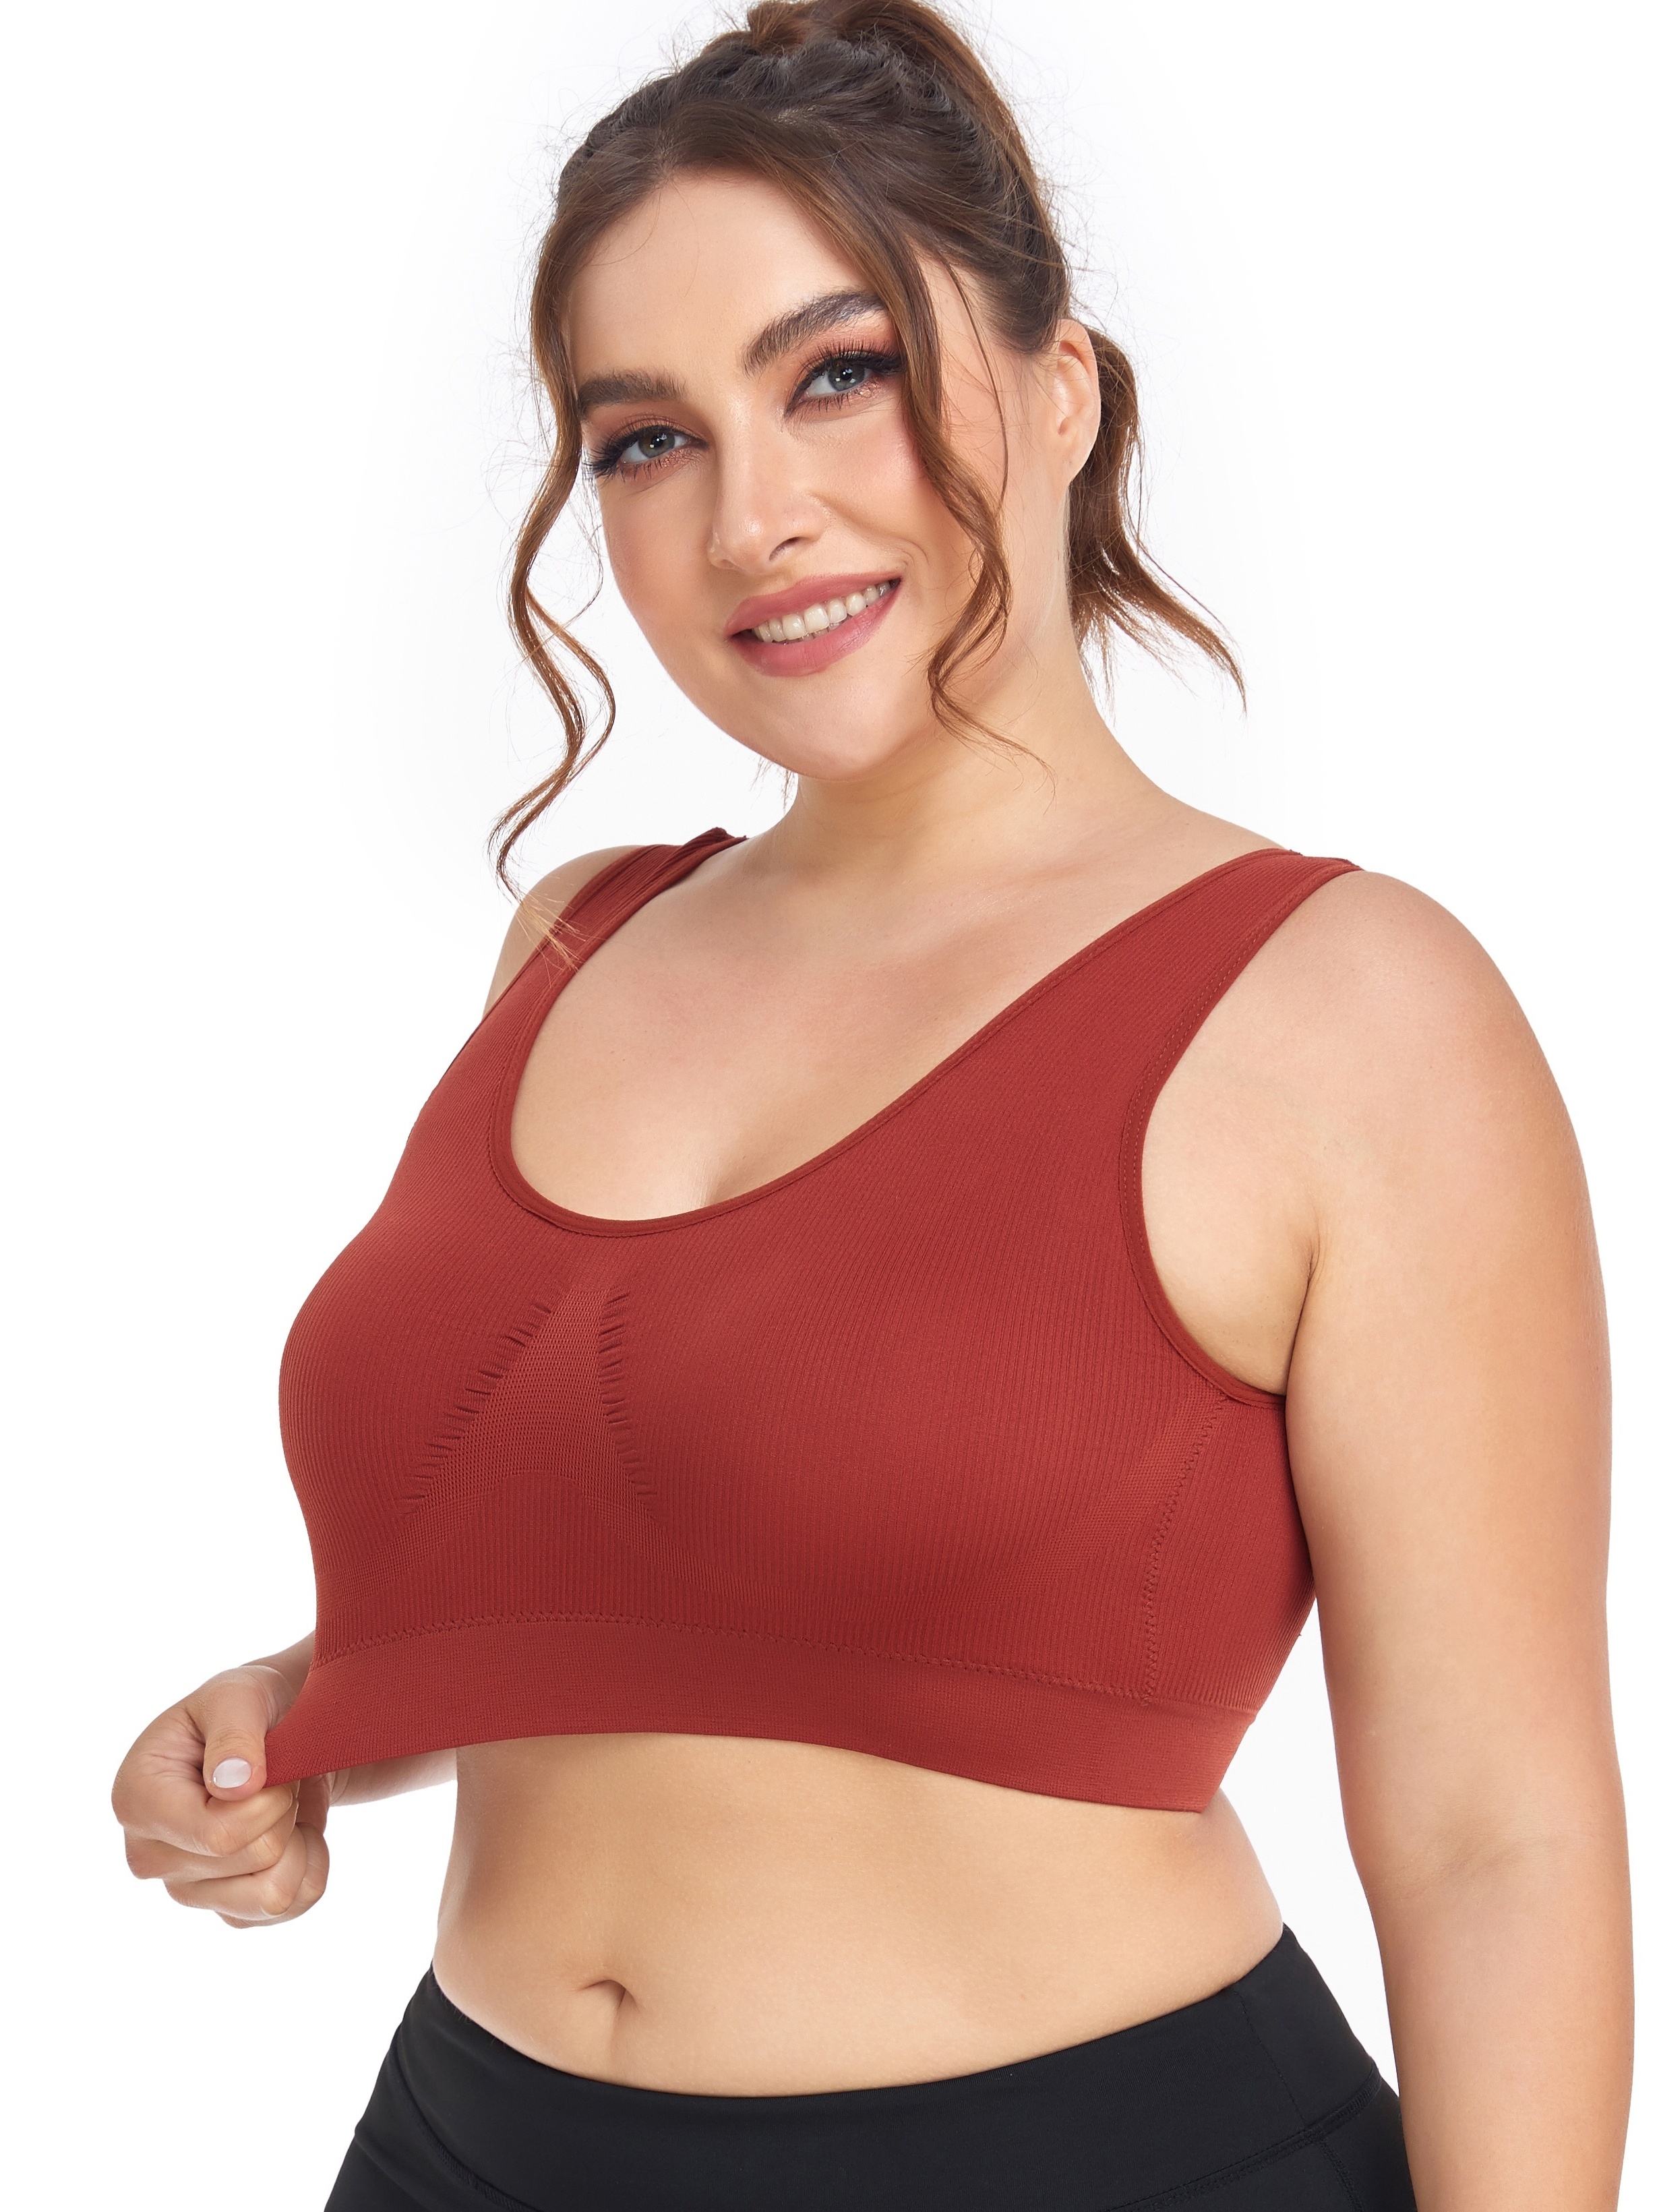  Womens Balconette Bra Plus Size Full Coverage Tshirt  Seamless Underwire Bras Back Smoothing Red Revelry 42C